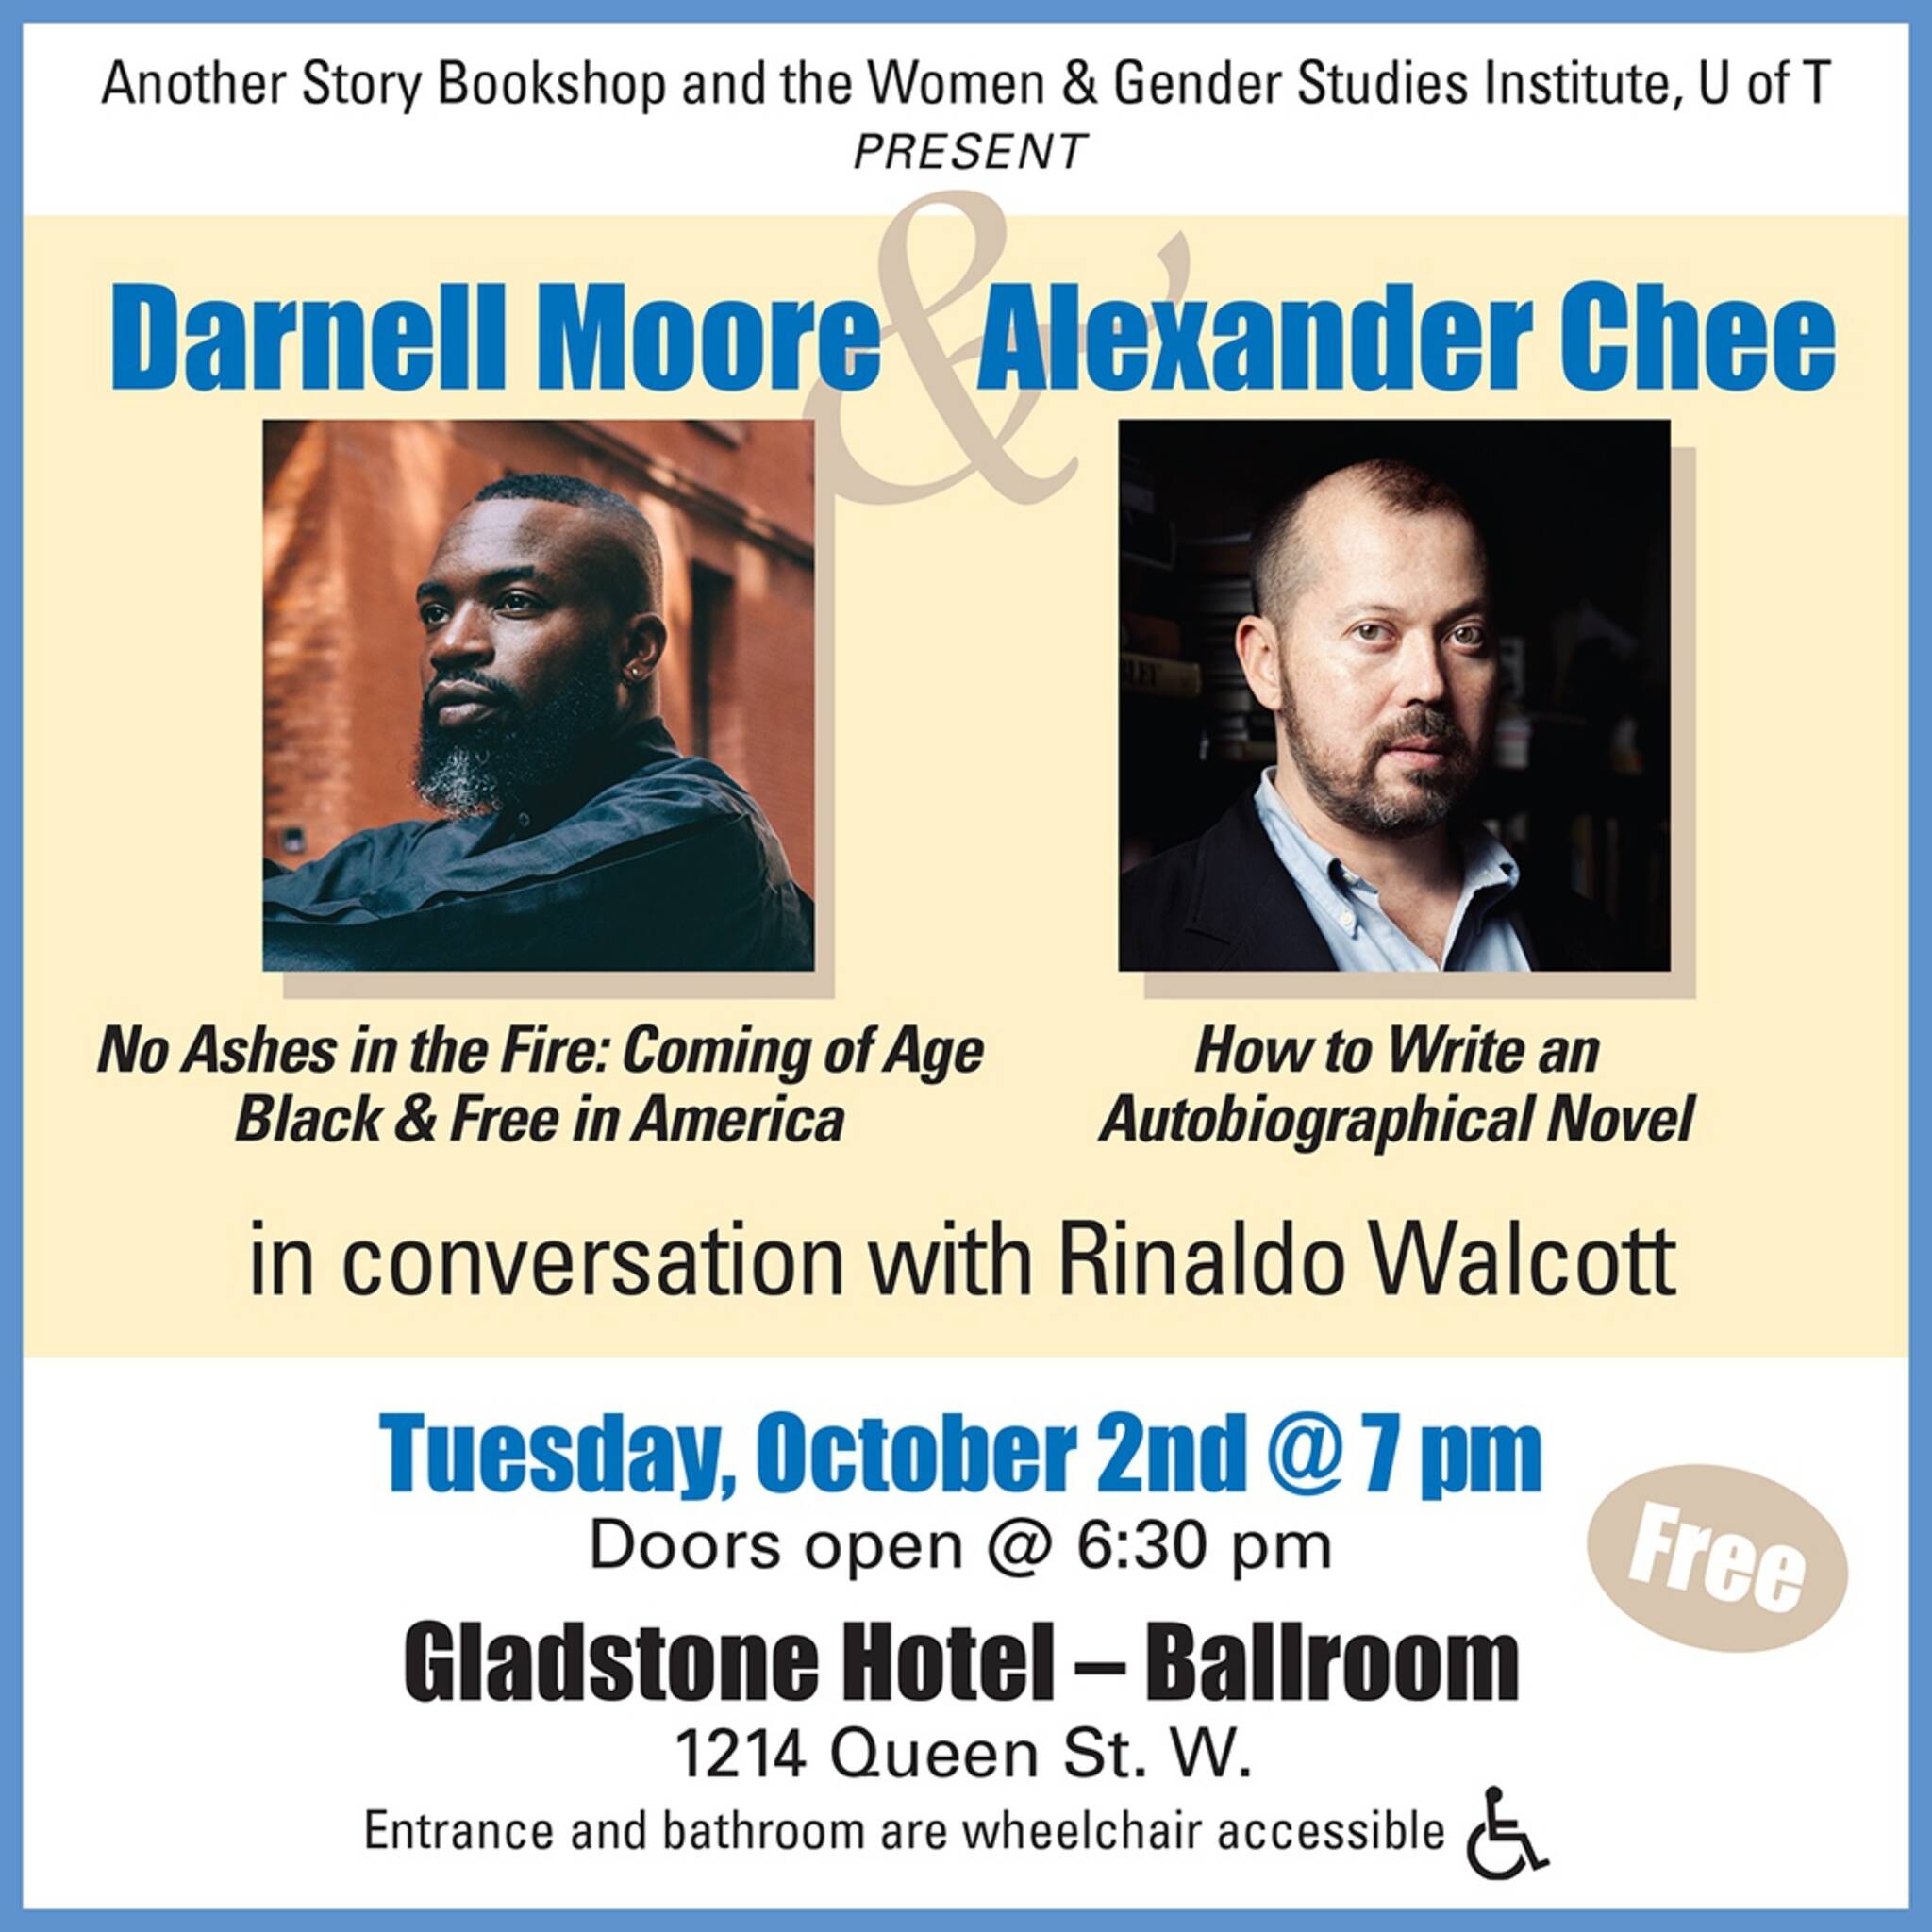 Darnell Moore and Alexander Chee in conversation with Rinaldo Walcott